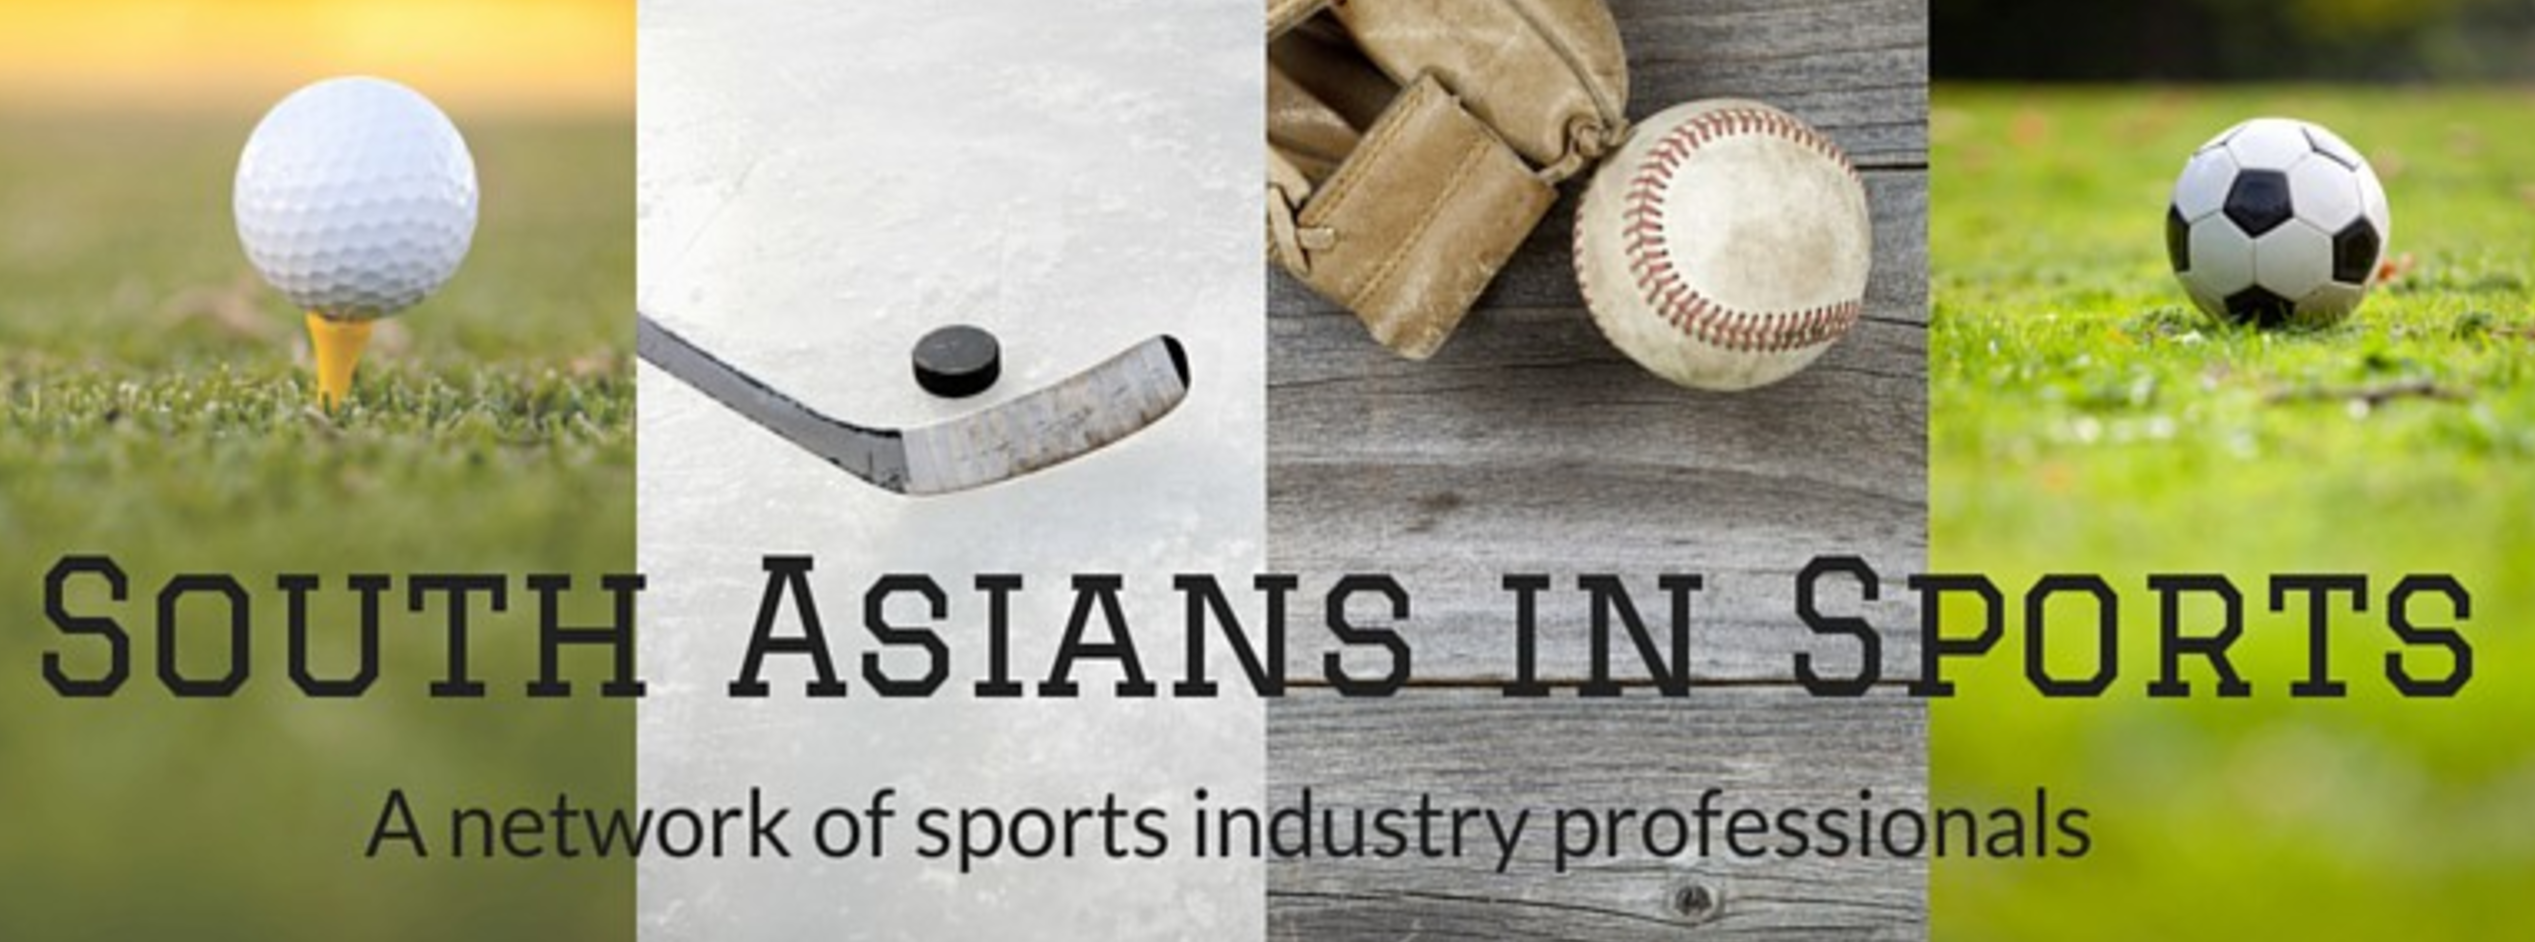 South Asians in Sports New York